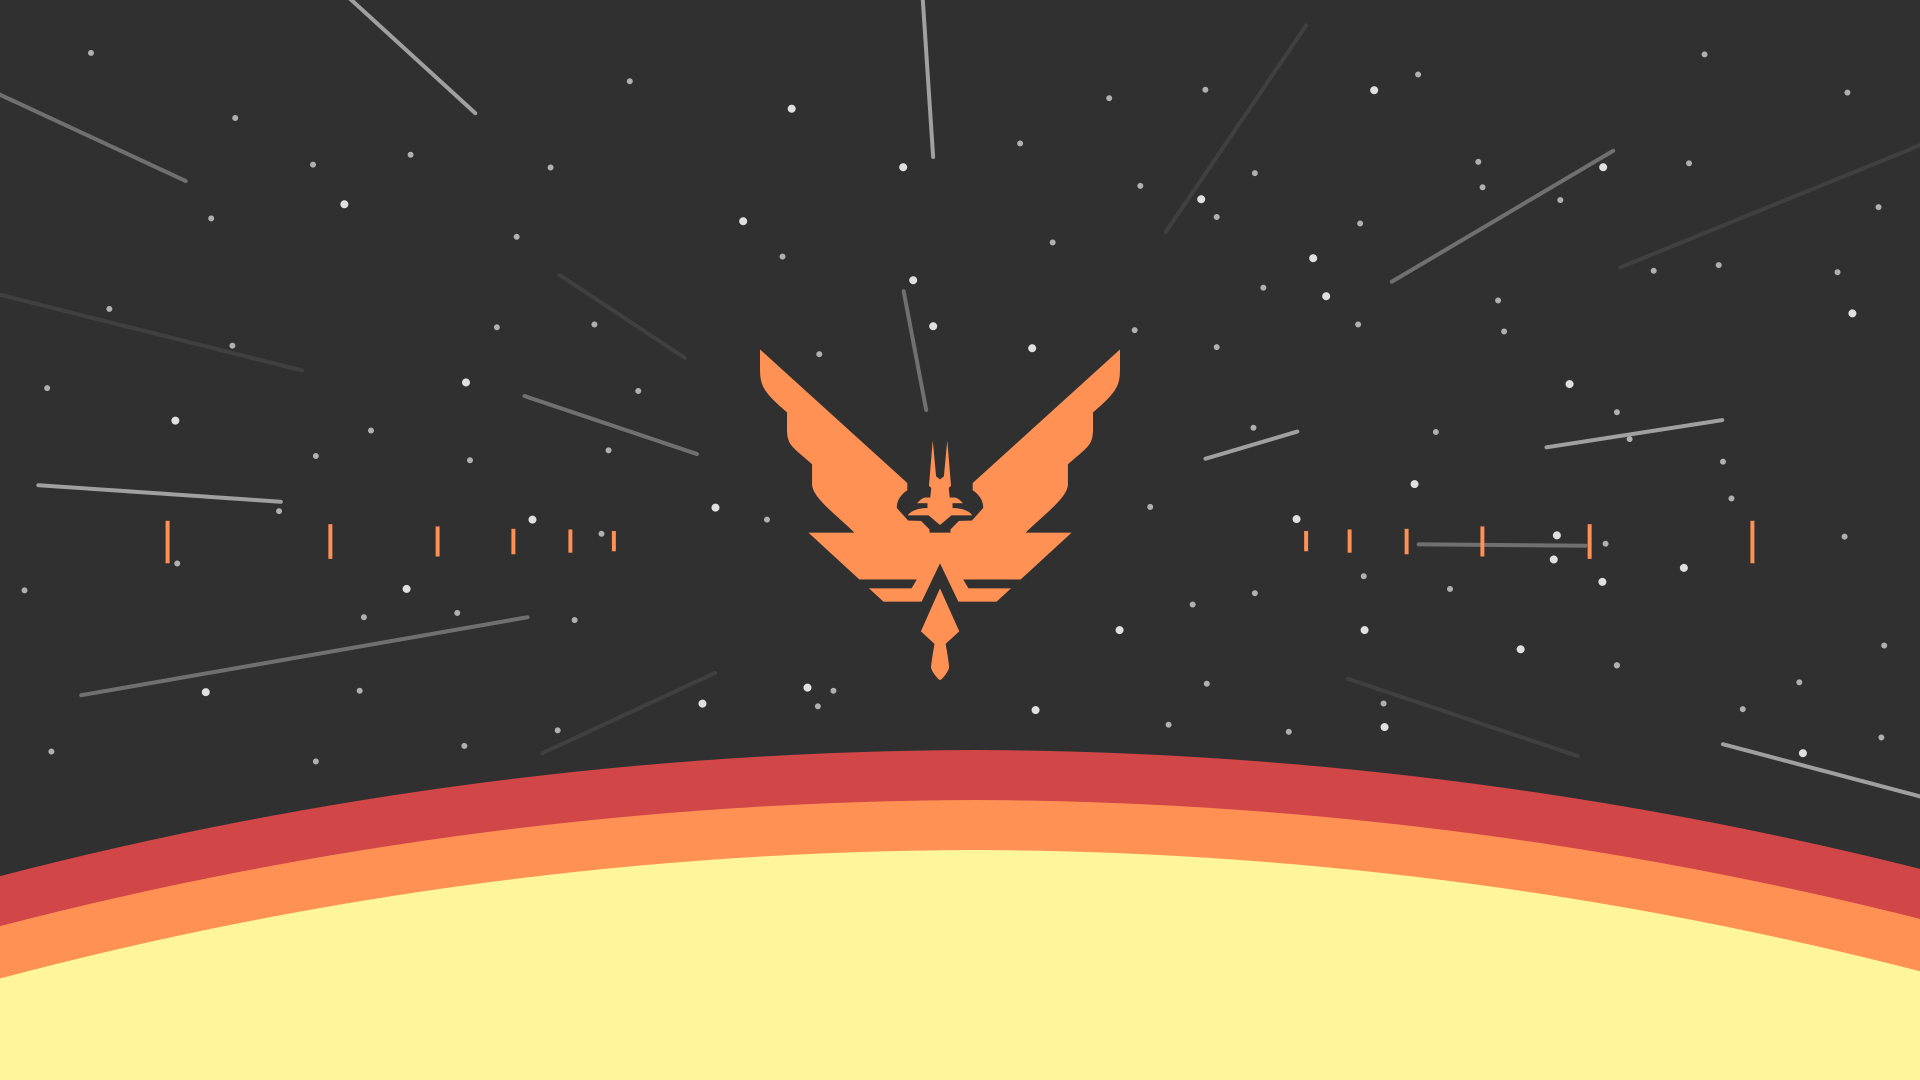 Here's a minimalist Elite Dangerous wallpaper I just finished